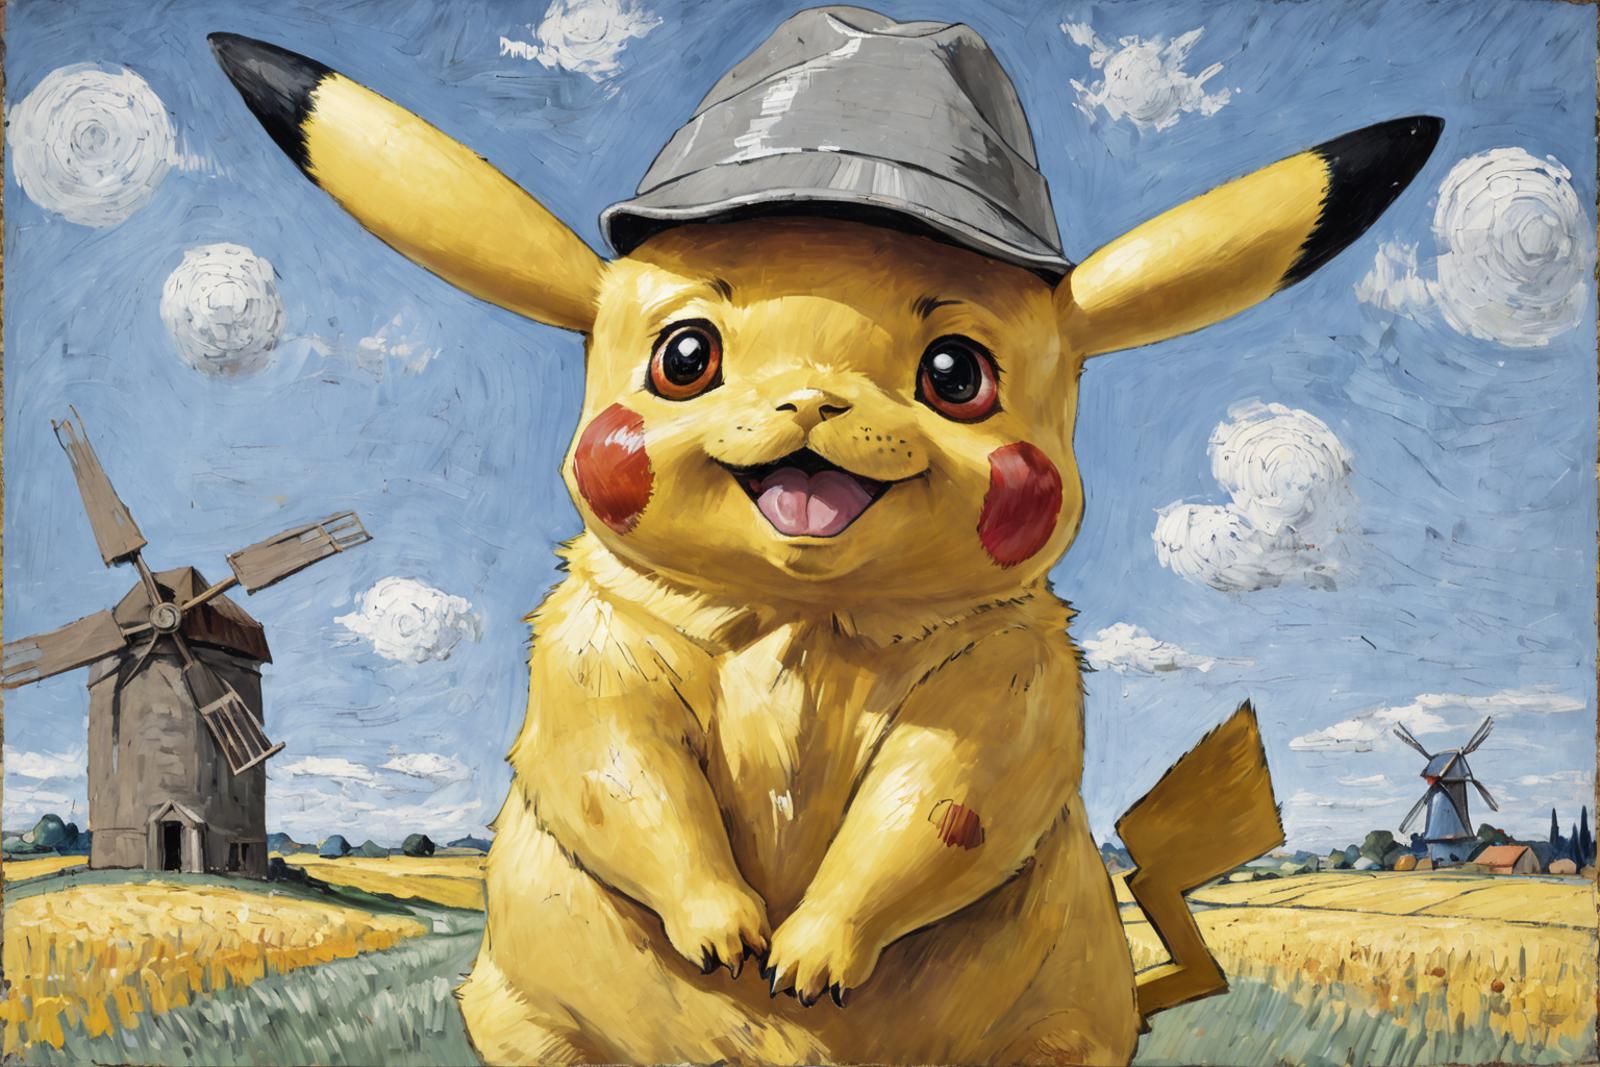 A large, happy yellow Pokemon character with a hat and a big smile.